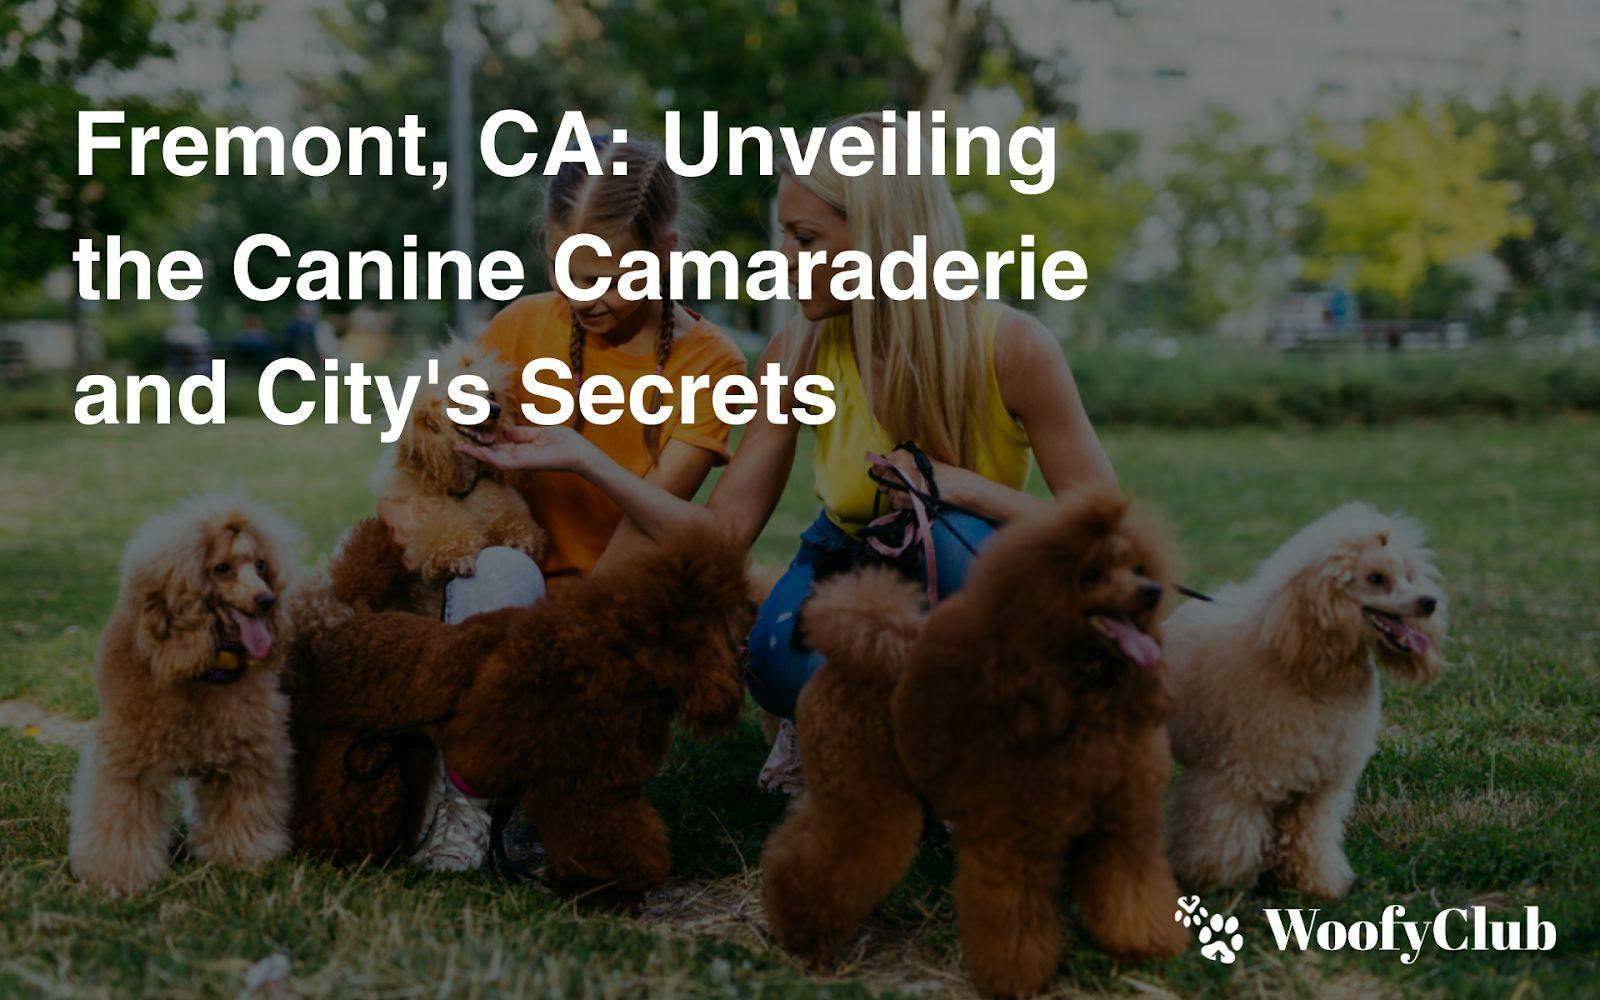 Fremont, CA: Unveiling The Canine Camaraderie And City's Secrets